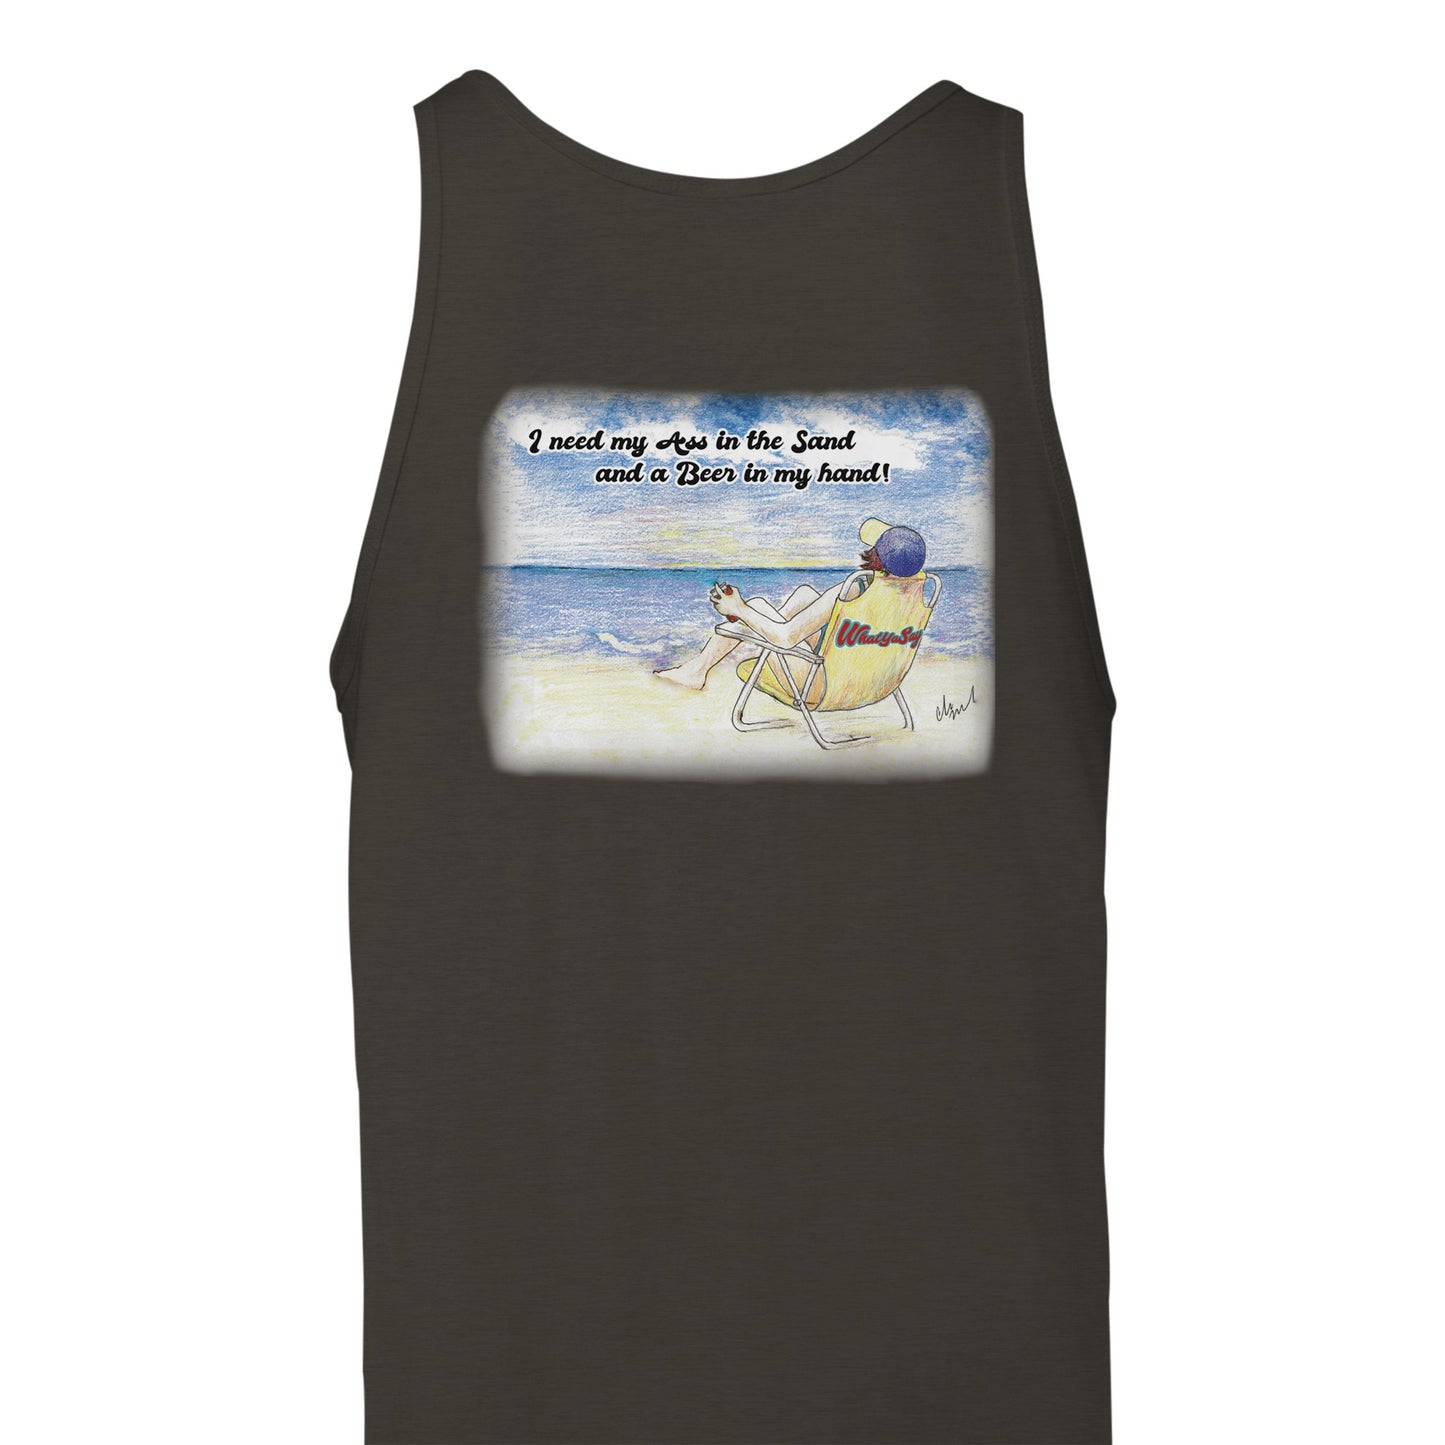 A dark grey heather Premium Unisex Tank Top with original artwork and motto I need my Ass in the Sand and a Beer in my hand on back and WhatYa Say logo on front from combed and ring-spun cotton back view from WhatYa Say Apparel.